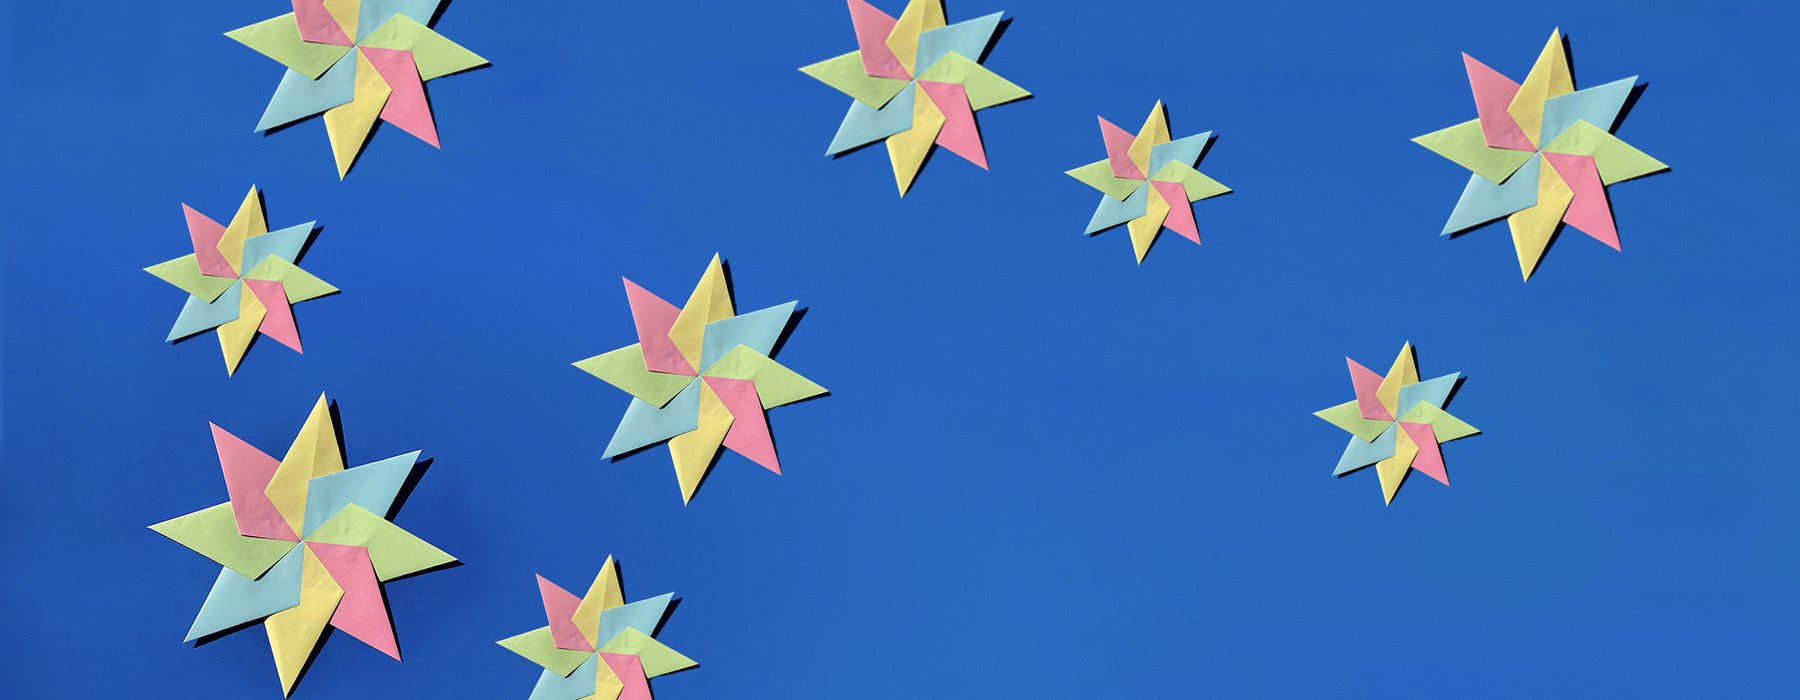 Colourful paper stars against a blue background